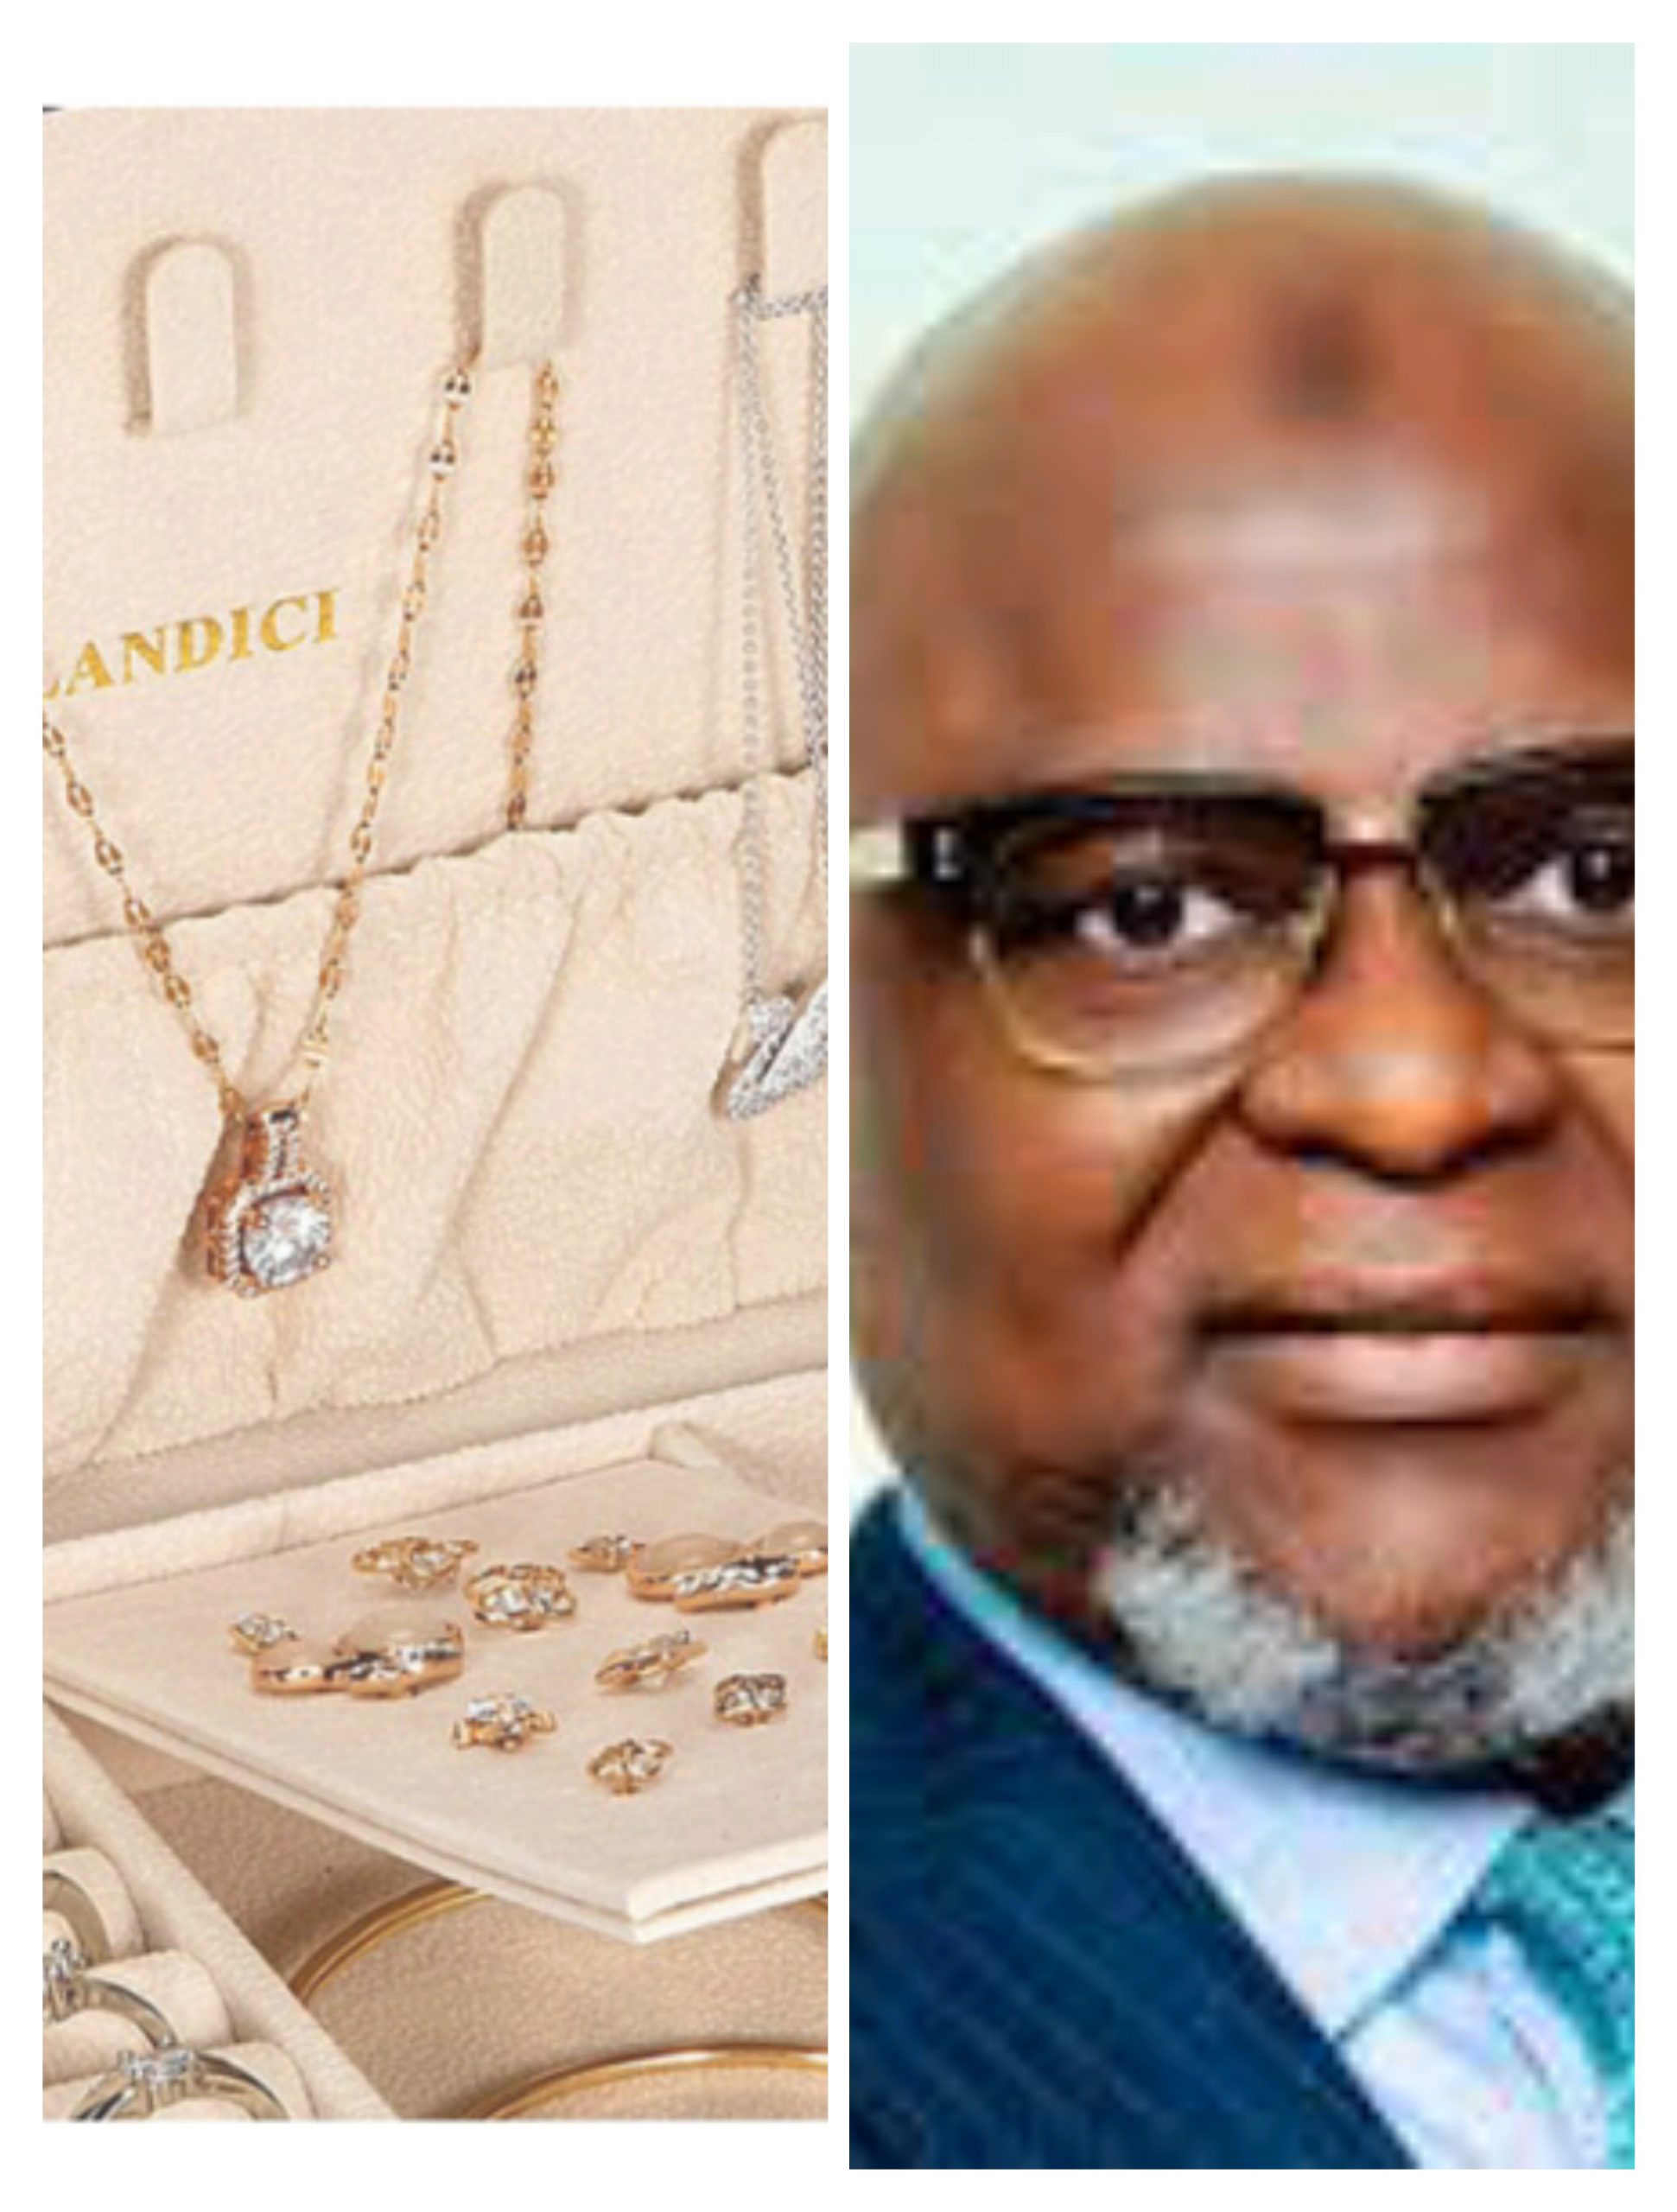 Adesola Kazeem’s First Bank In Trouble: Ex-Envoy’s N1 Billion Jewelry Box Disappeared From Vault